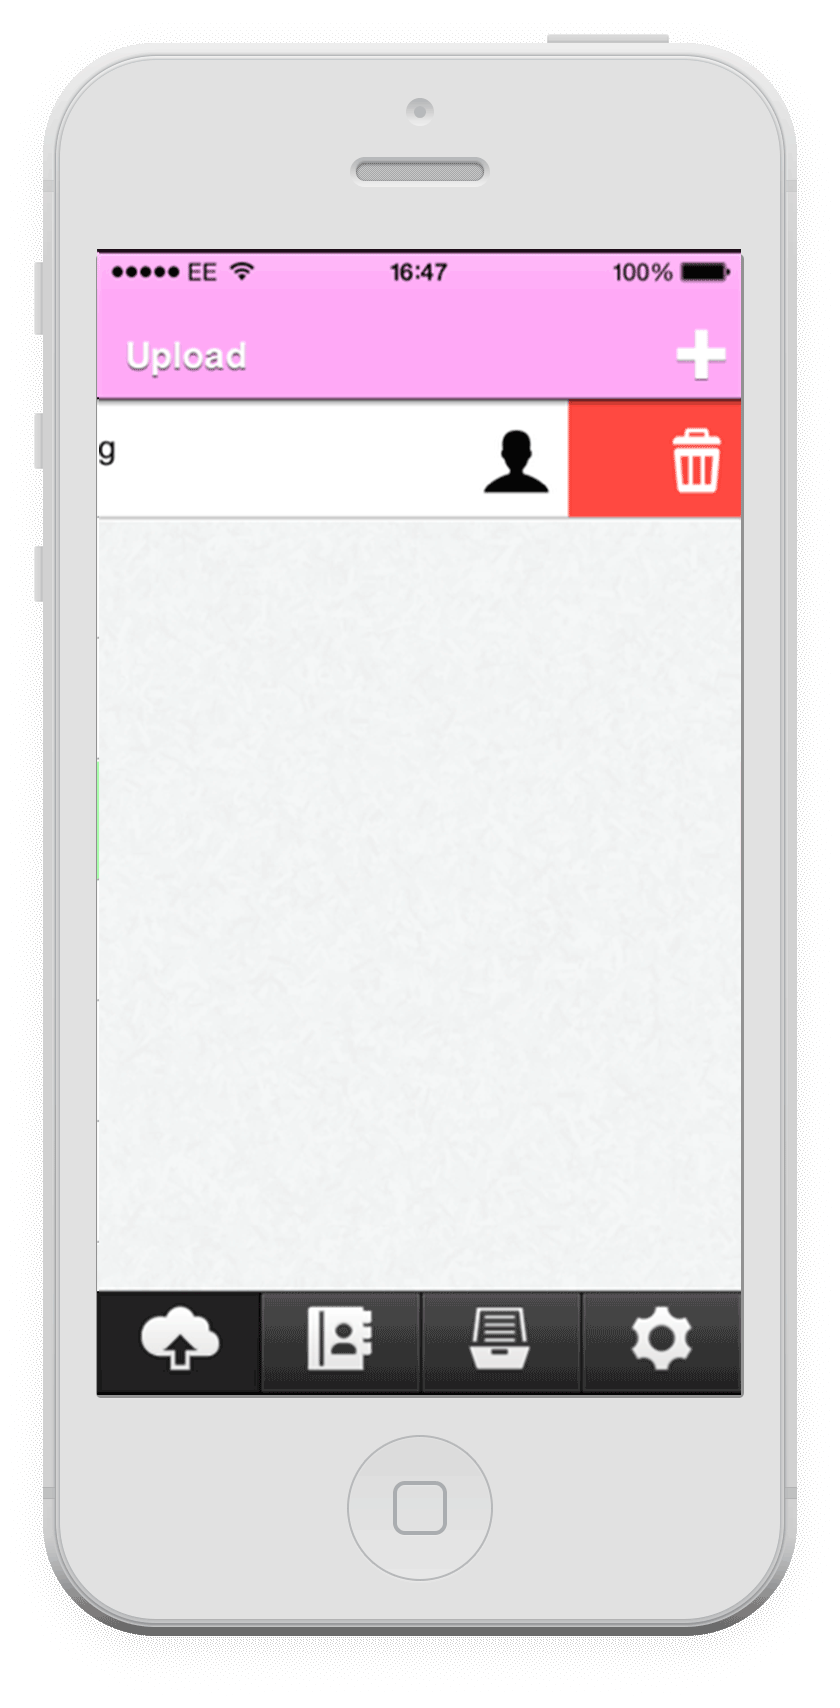 Swipe to the left to remove a file from the queue